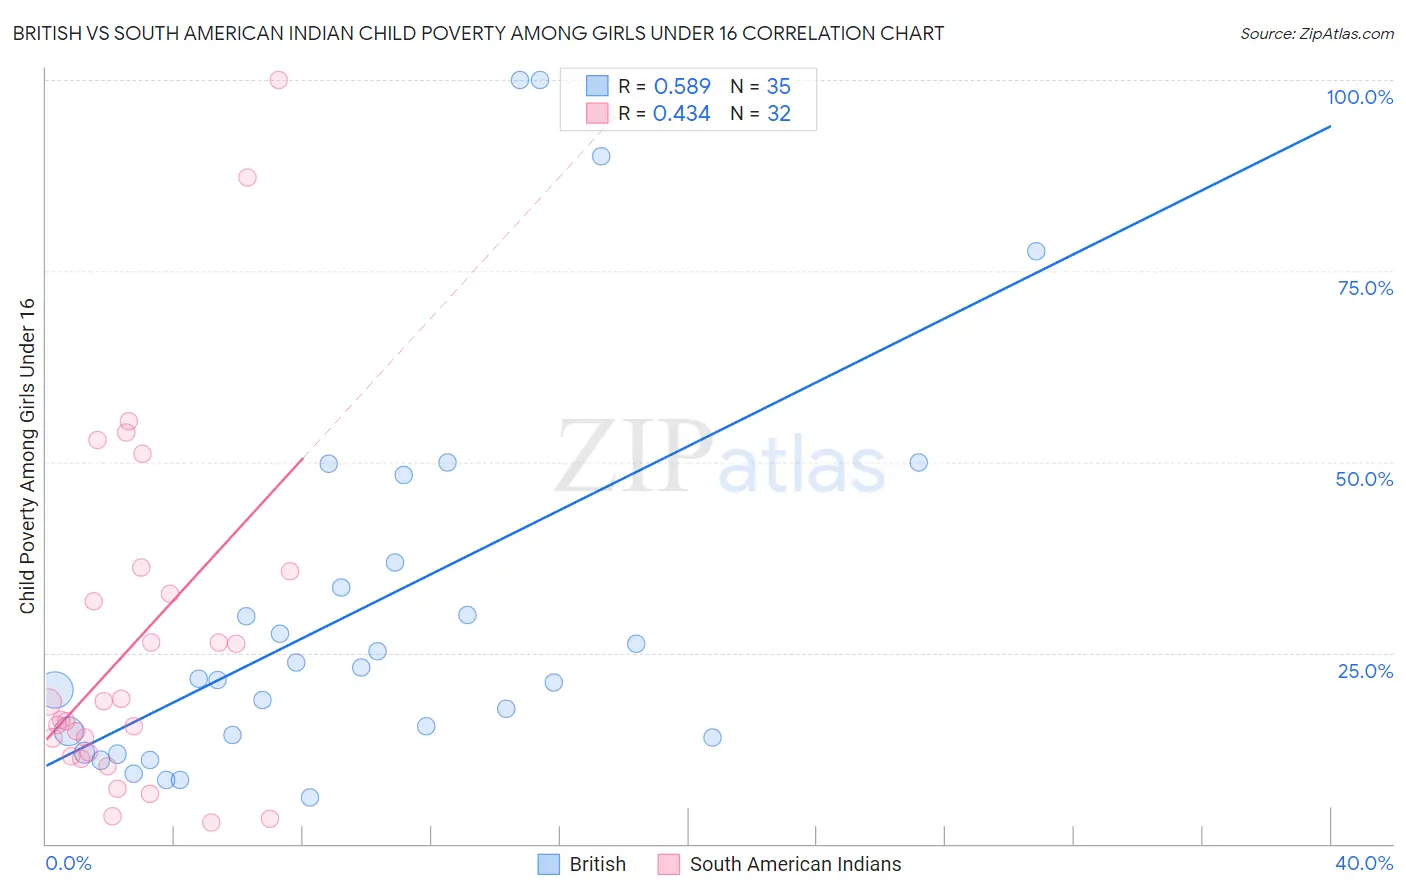 British vs South American Indian Child Poverty Among Girls Under 16